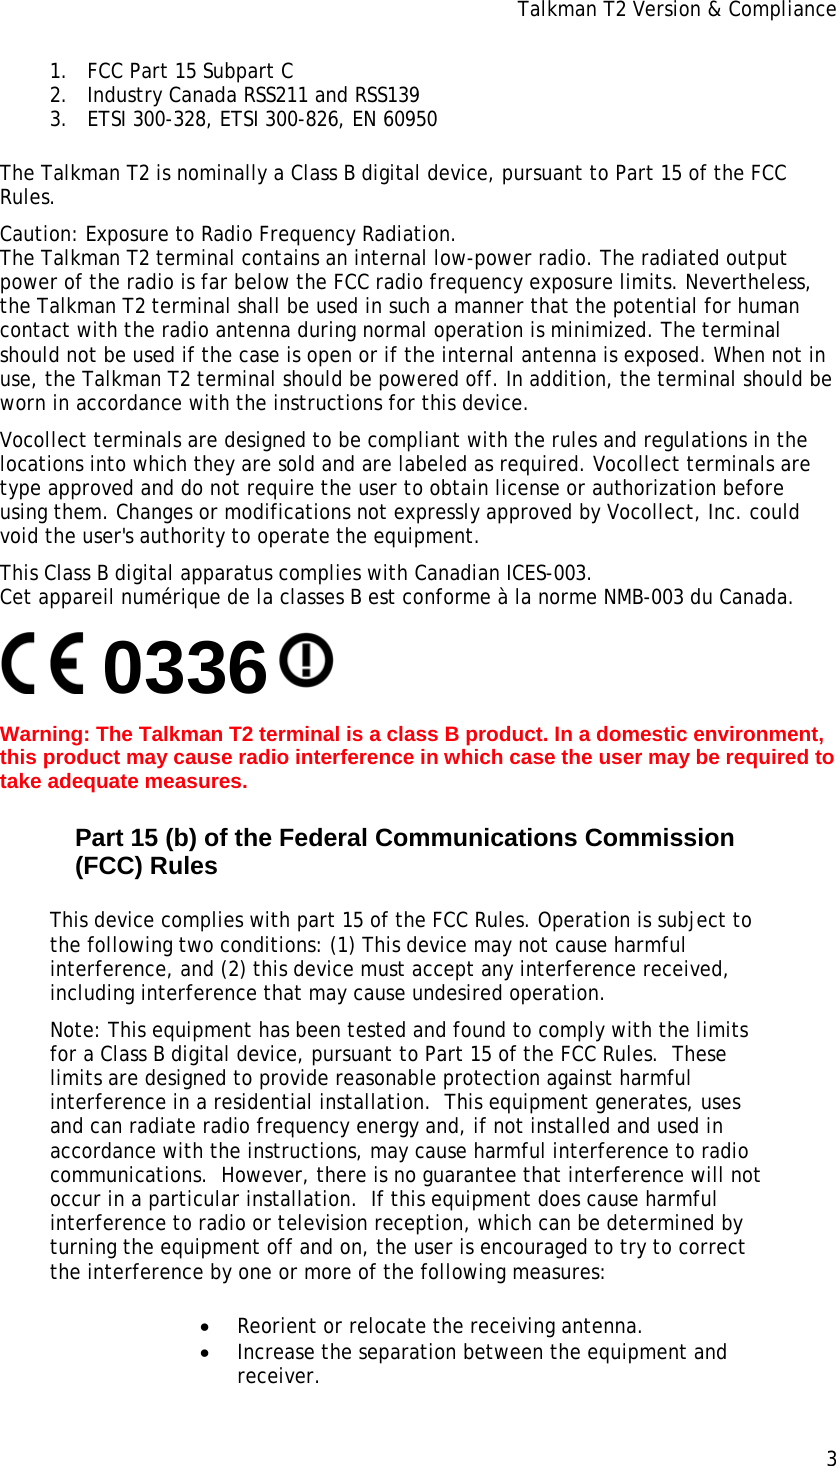 Talkman T2 Version &amp; Compliance 1. FCC Part 15 Subpart C 2. Industry Canada RSS211 and RSS139 3. ETSI 300-328, ETSI 300-826, EN 60950 The Talkman T2 is nominally a Class B digital device, pursuant to Part 15 of the FCC Rules. Caution: Exposure to Radio Frequency Radiation. The Talkman T2 terminal contains an internal low-power radio. The radiated output power of the radio is far below the FCC radio frequency exposure limits. Nevertheless, the Talkman T2 terminal shall be used in such a manner that the potential for human contact with the radio antenna during normal operation is minimized. The terminal should not be used if the case is open or if the internal antenna is exposed. When not in use, the Talkman T2 terminal should be powered off. In addition, the terminal should be worn in accordance with the instructions for this device. Vocollect terminals are designed to be compliant with the rules and regulations in the locations into which they are sold and are labeled as required. Vocollect terminals are type approved and do not require the user to obtain license or authorization before using them. Changes or modifications not expressly approved by Vocollect, Inc. could void the user&apos;s authority to operate the equipment. This Class B digital apparatus complies with Canadian ICES-003. Cet appareil numérique de la classes B est conforme à la norme NMB-003 du Canada.        0336  Warning: The Talkman T2 terminal is a class B product. In a domestic environment, this product may cause radio interference in which case the user may be required to take adequate measures. Part 15 (b) of the Federal Communications Commission (FCC) Rules This device complies with part 15 of the FCC Rules. Operation is subject to the following two conditions: (1) This device may not cause harmful interference, and (2) this device must accept any interference received, including interference that may cause undesired operation. Note: This equipment has been tested and found to comply with the limits for a Class B digital device, pursuant to Part 15 of the FCC Rules.  These limits are designed to provide reasonable protection against harmful interference in a residential installation.  This equipment generates, uses and can radiate radio frequency energy and, if not installed and used in accordance with the instructions, may cause harmful interference to radio communications.  However, there is no guarantee that interference will not occur in a particular installation.  If this equipment does cause harmful interference to radio or television reception, which can be determined by turning the equipment off and on, the user is encouraged to try to correct the interference by one or more of the following measures:  • Reorient or relocate the receiving antenna. • Increase the separation between the equipment and receiver. 3 